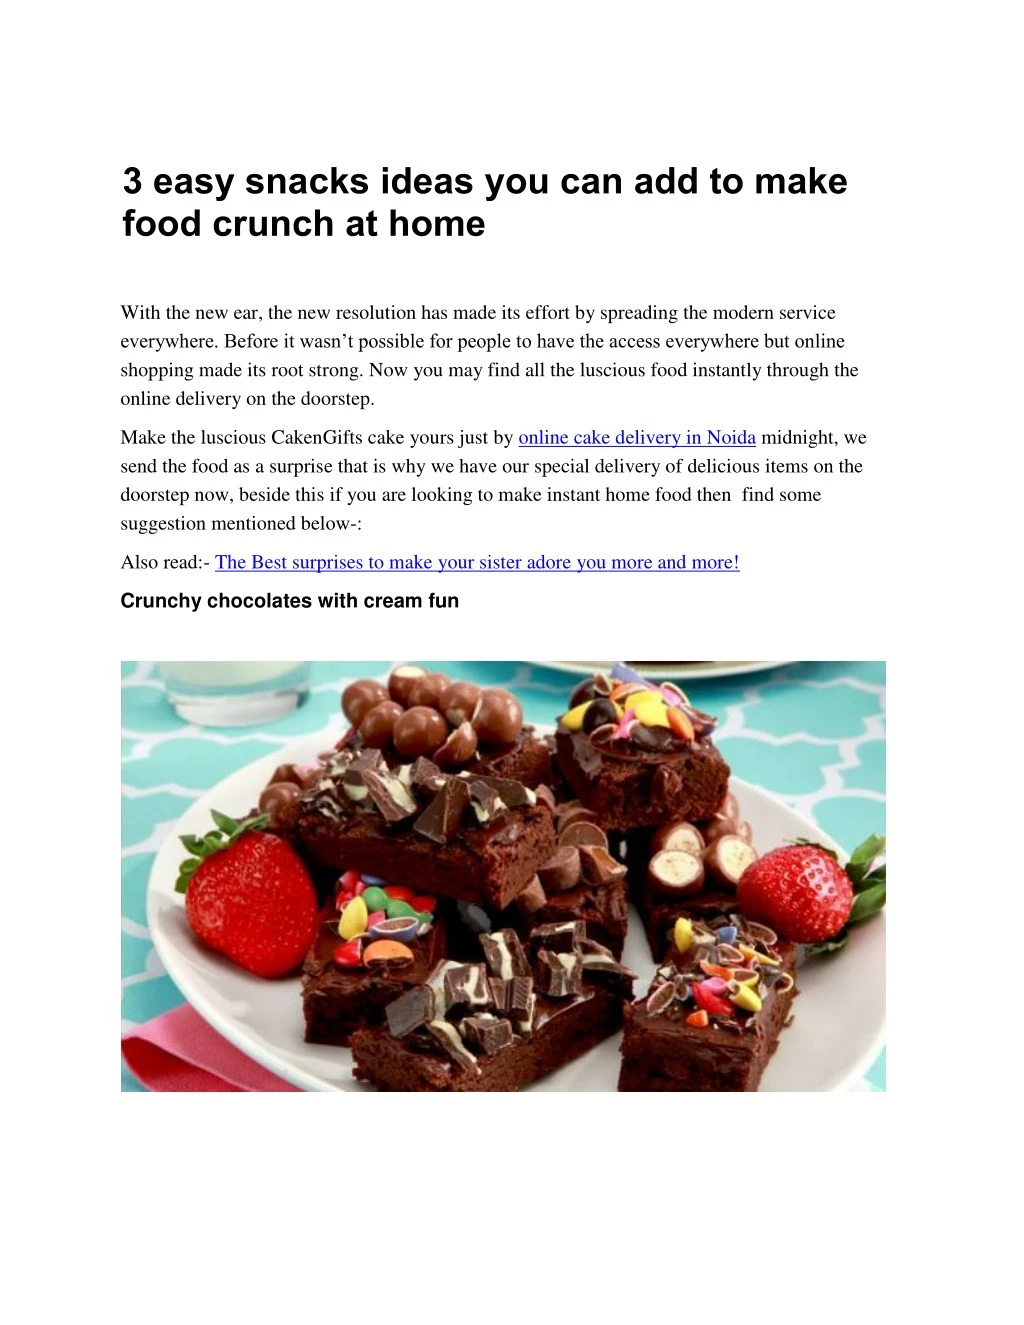 3 easy snacks ideas you can add to make food n.